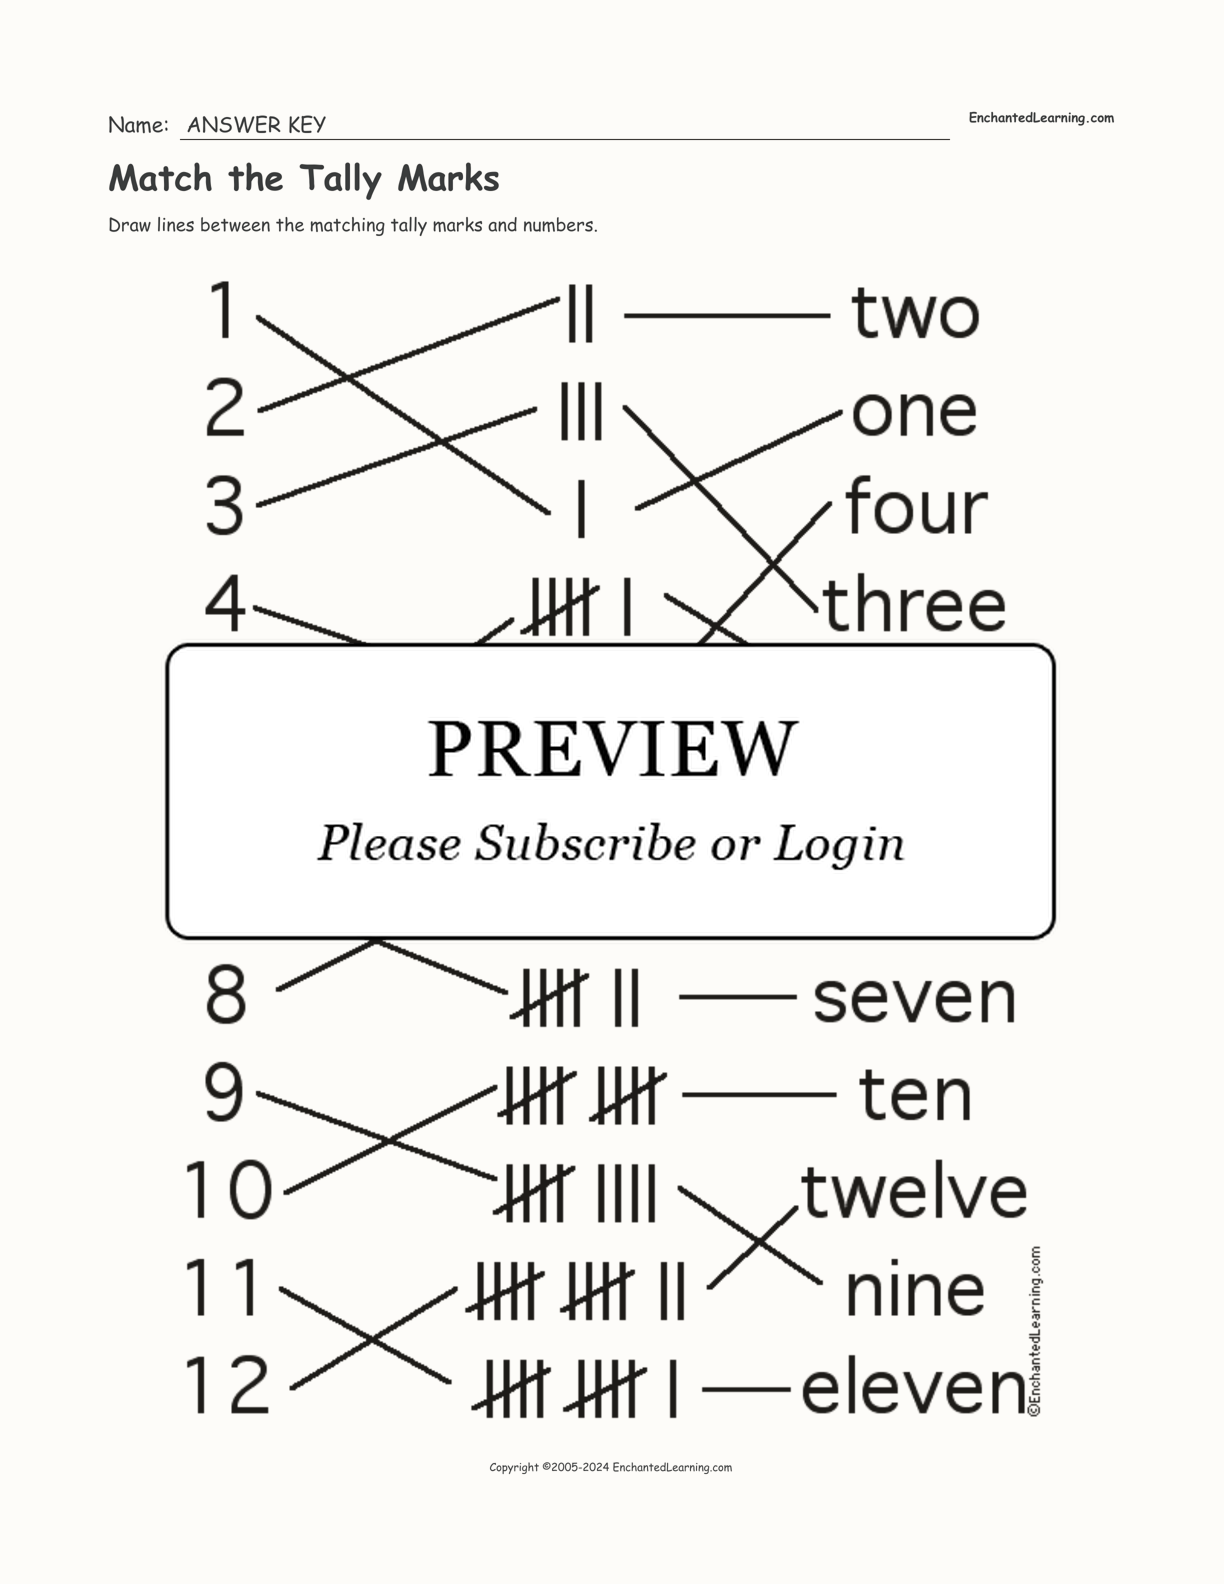 Match the Tally Marks interactive worksheet page 2